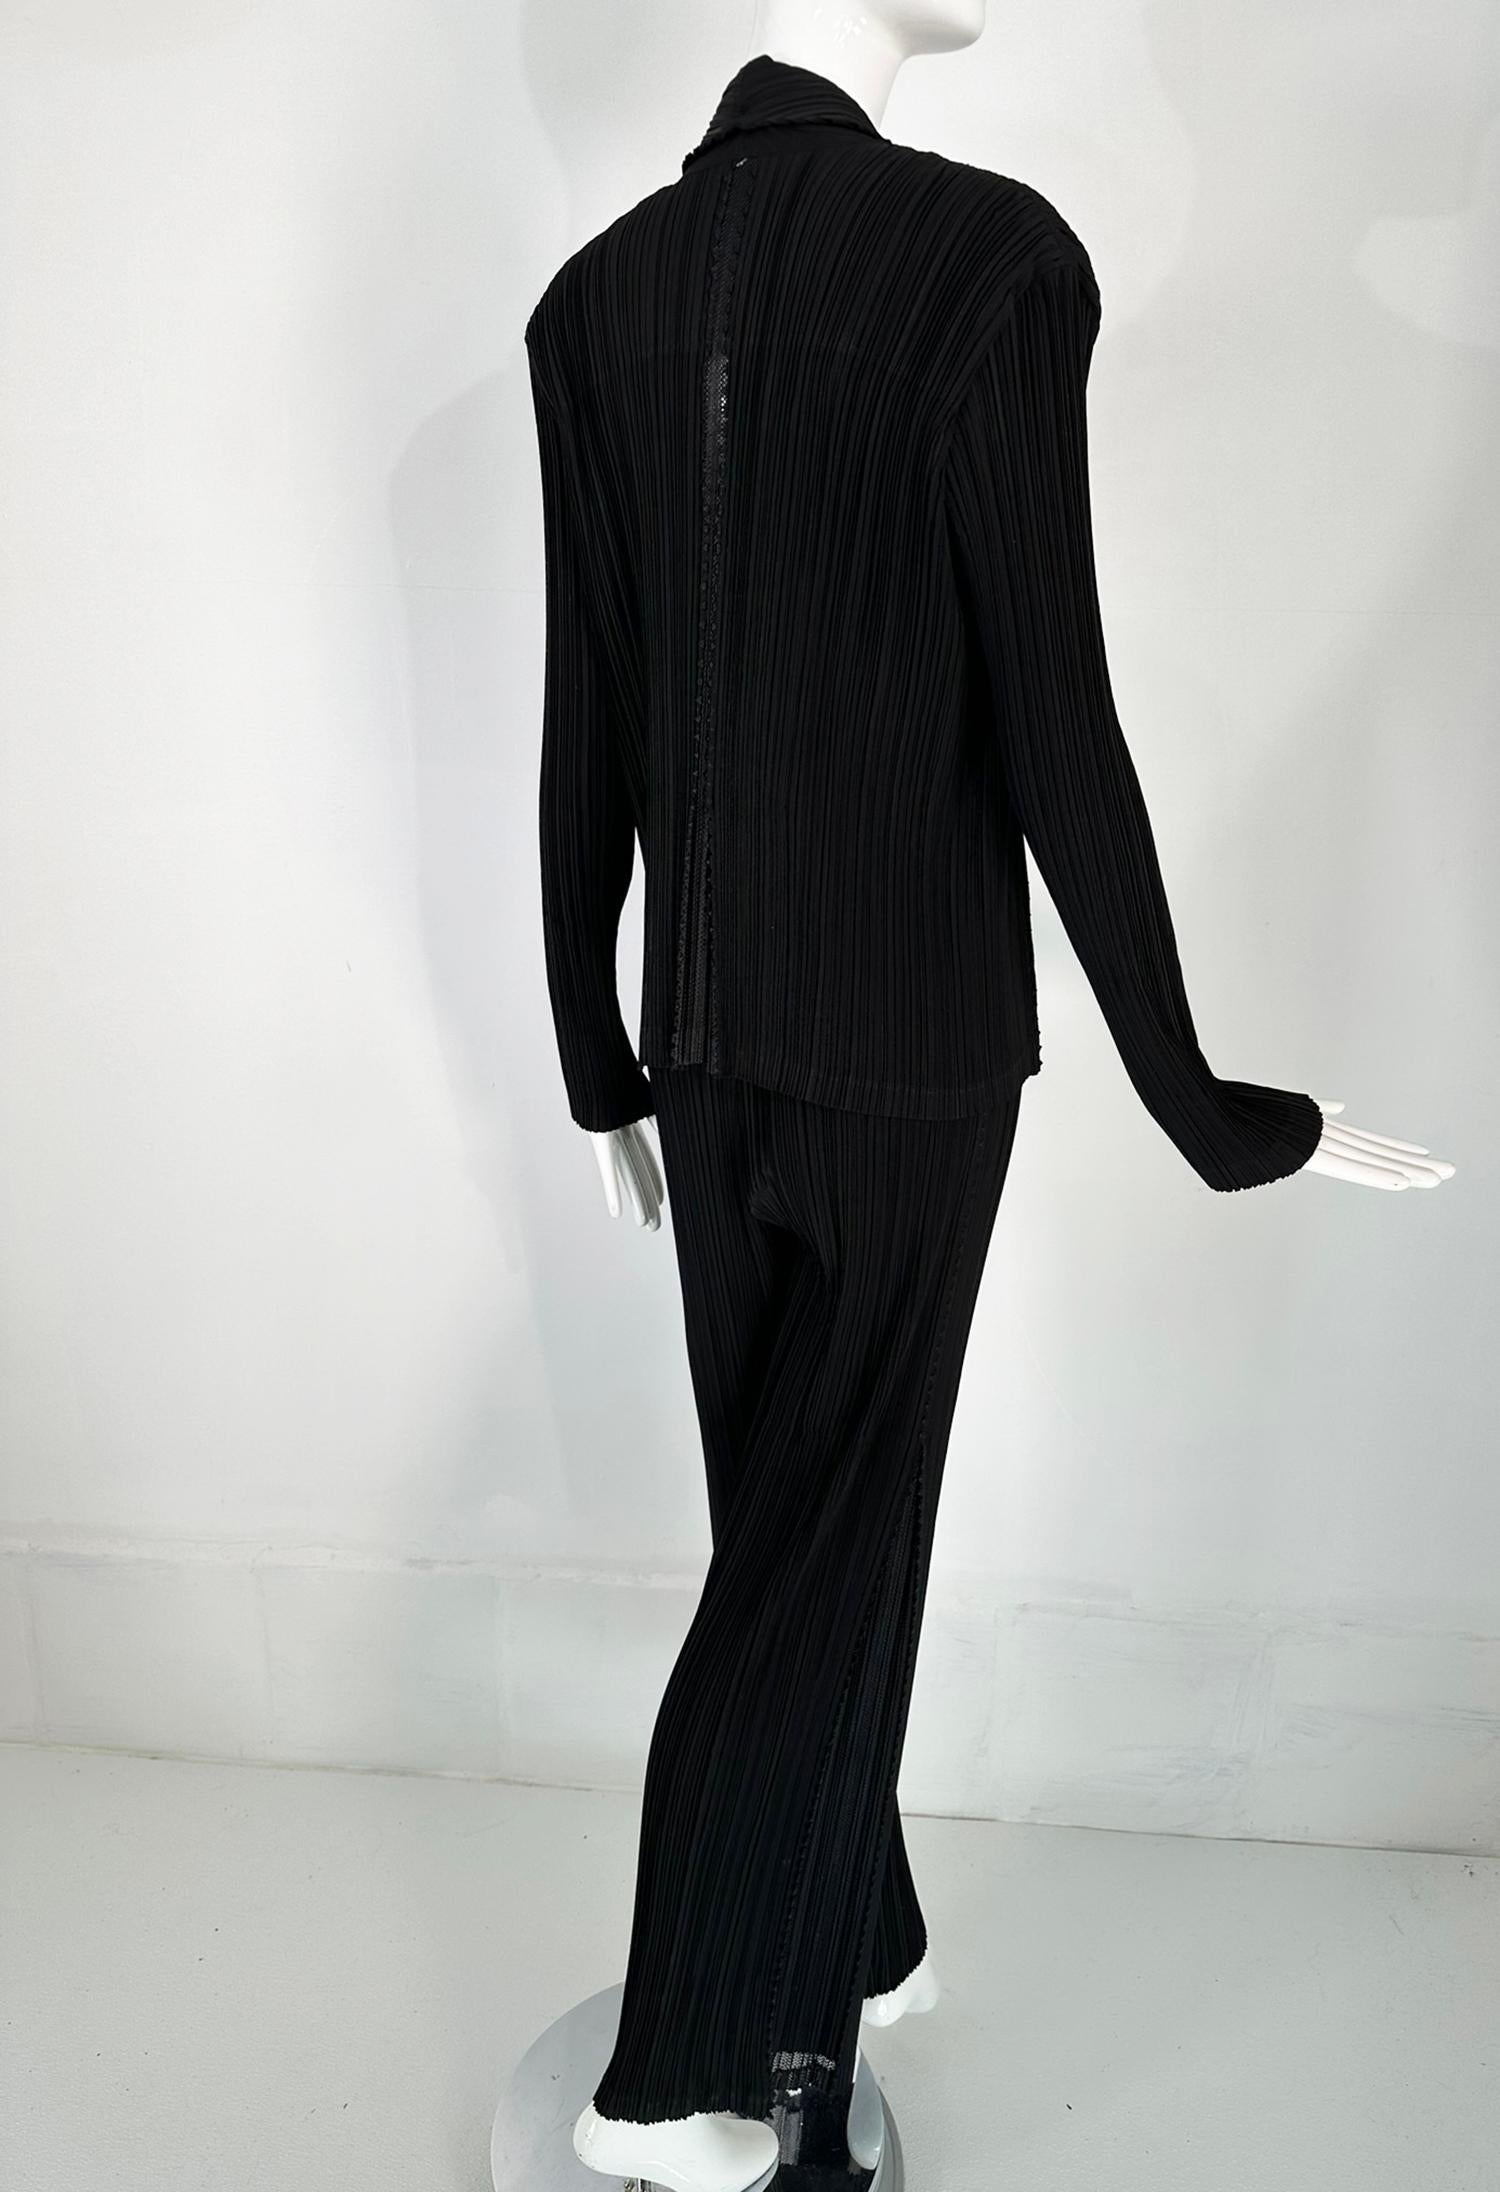 Issey Miyake Fete 2pc Jacket & Pant Black Pleats with Open Mesh Insertion Size 4 2